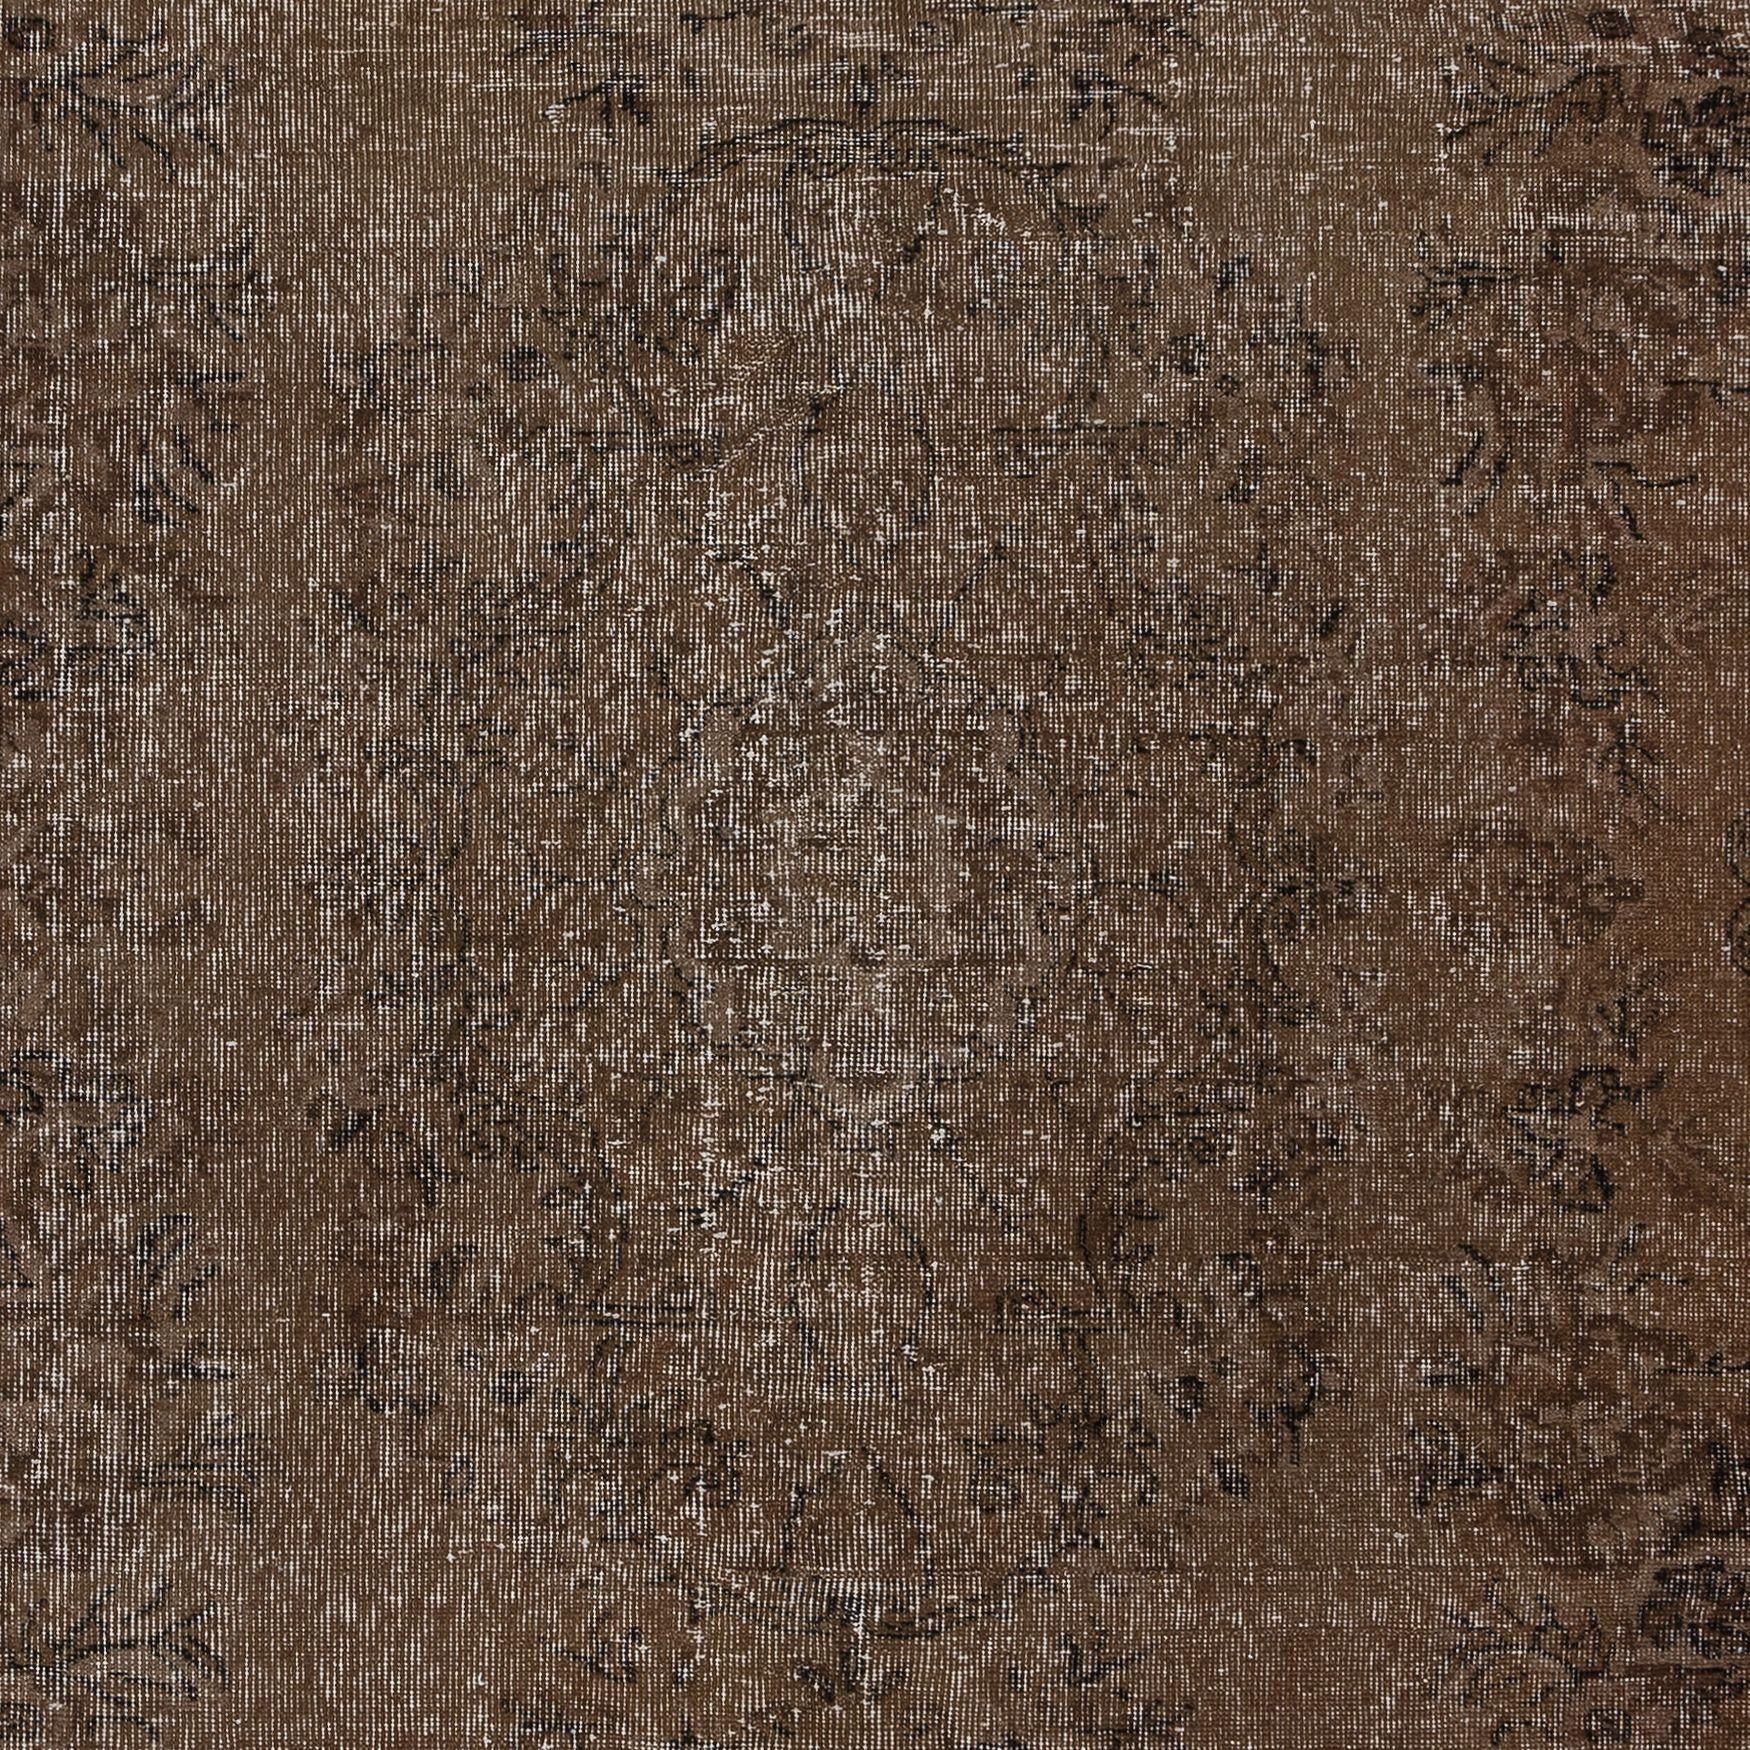 Hand-Knotted 5.7x9.6 Ft Vintage Area Rug in Brown for Modern Interiors, HandKnotted in Turkey For Sale